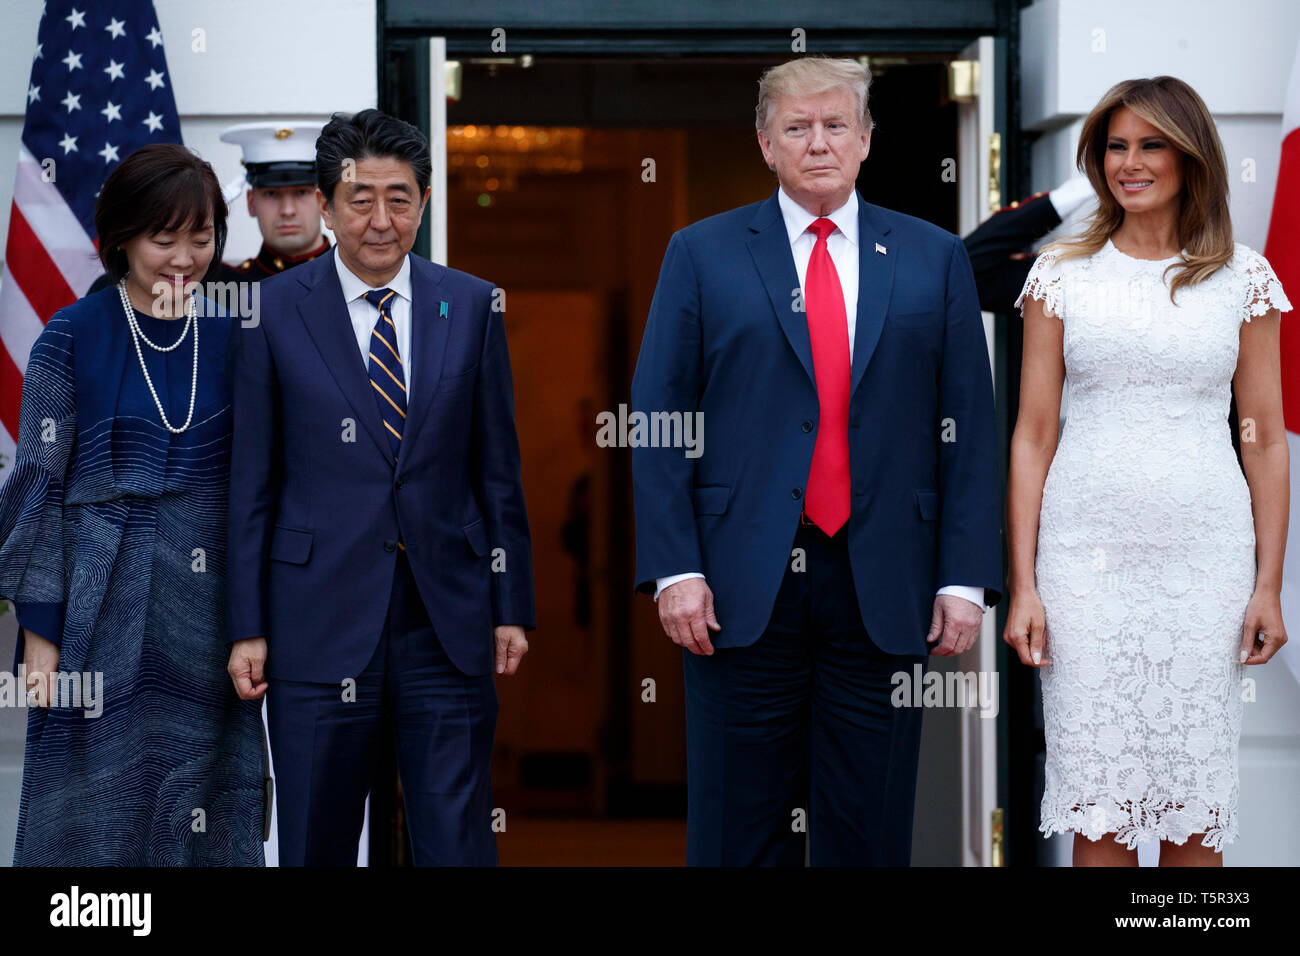 US President Donald J. Trump (2-R) and First Lady Melania Trump (R) greet  Japanese Prime Minister Shinzo Abe (L) and First Lady Akie Abe (2-L) at the  South Portico of the White